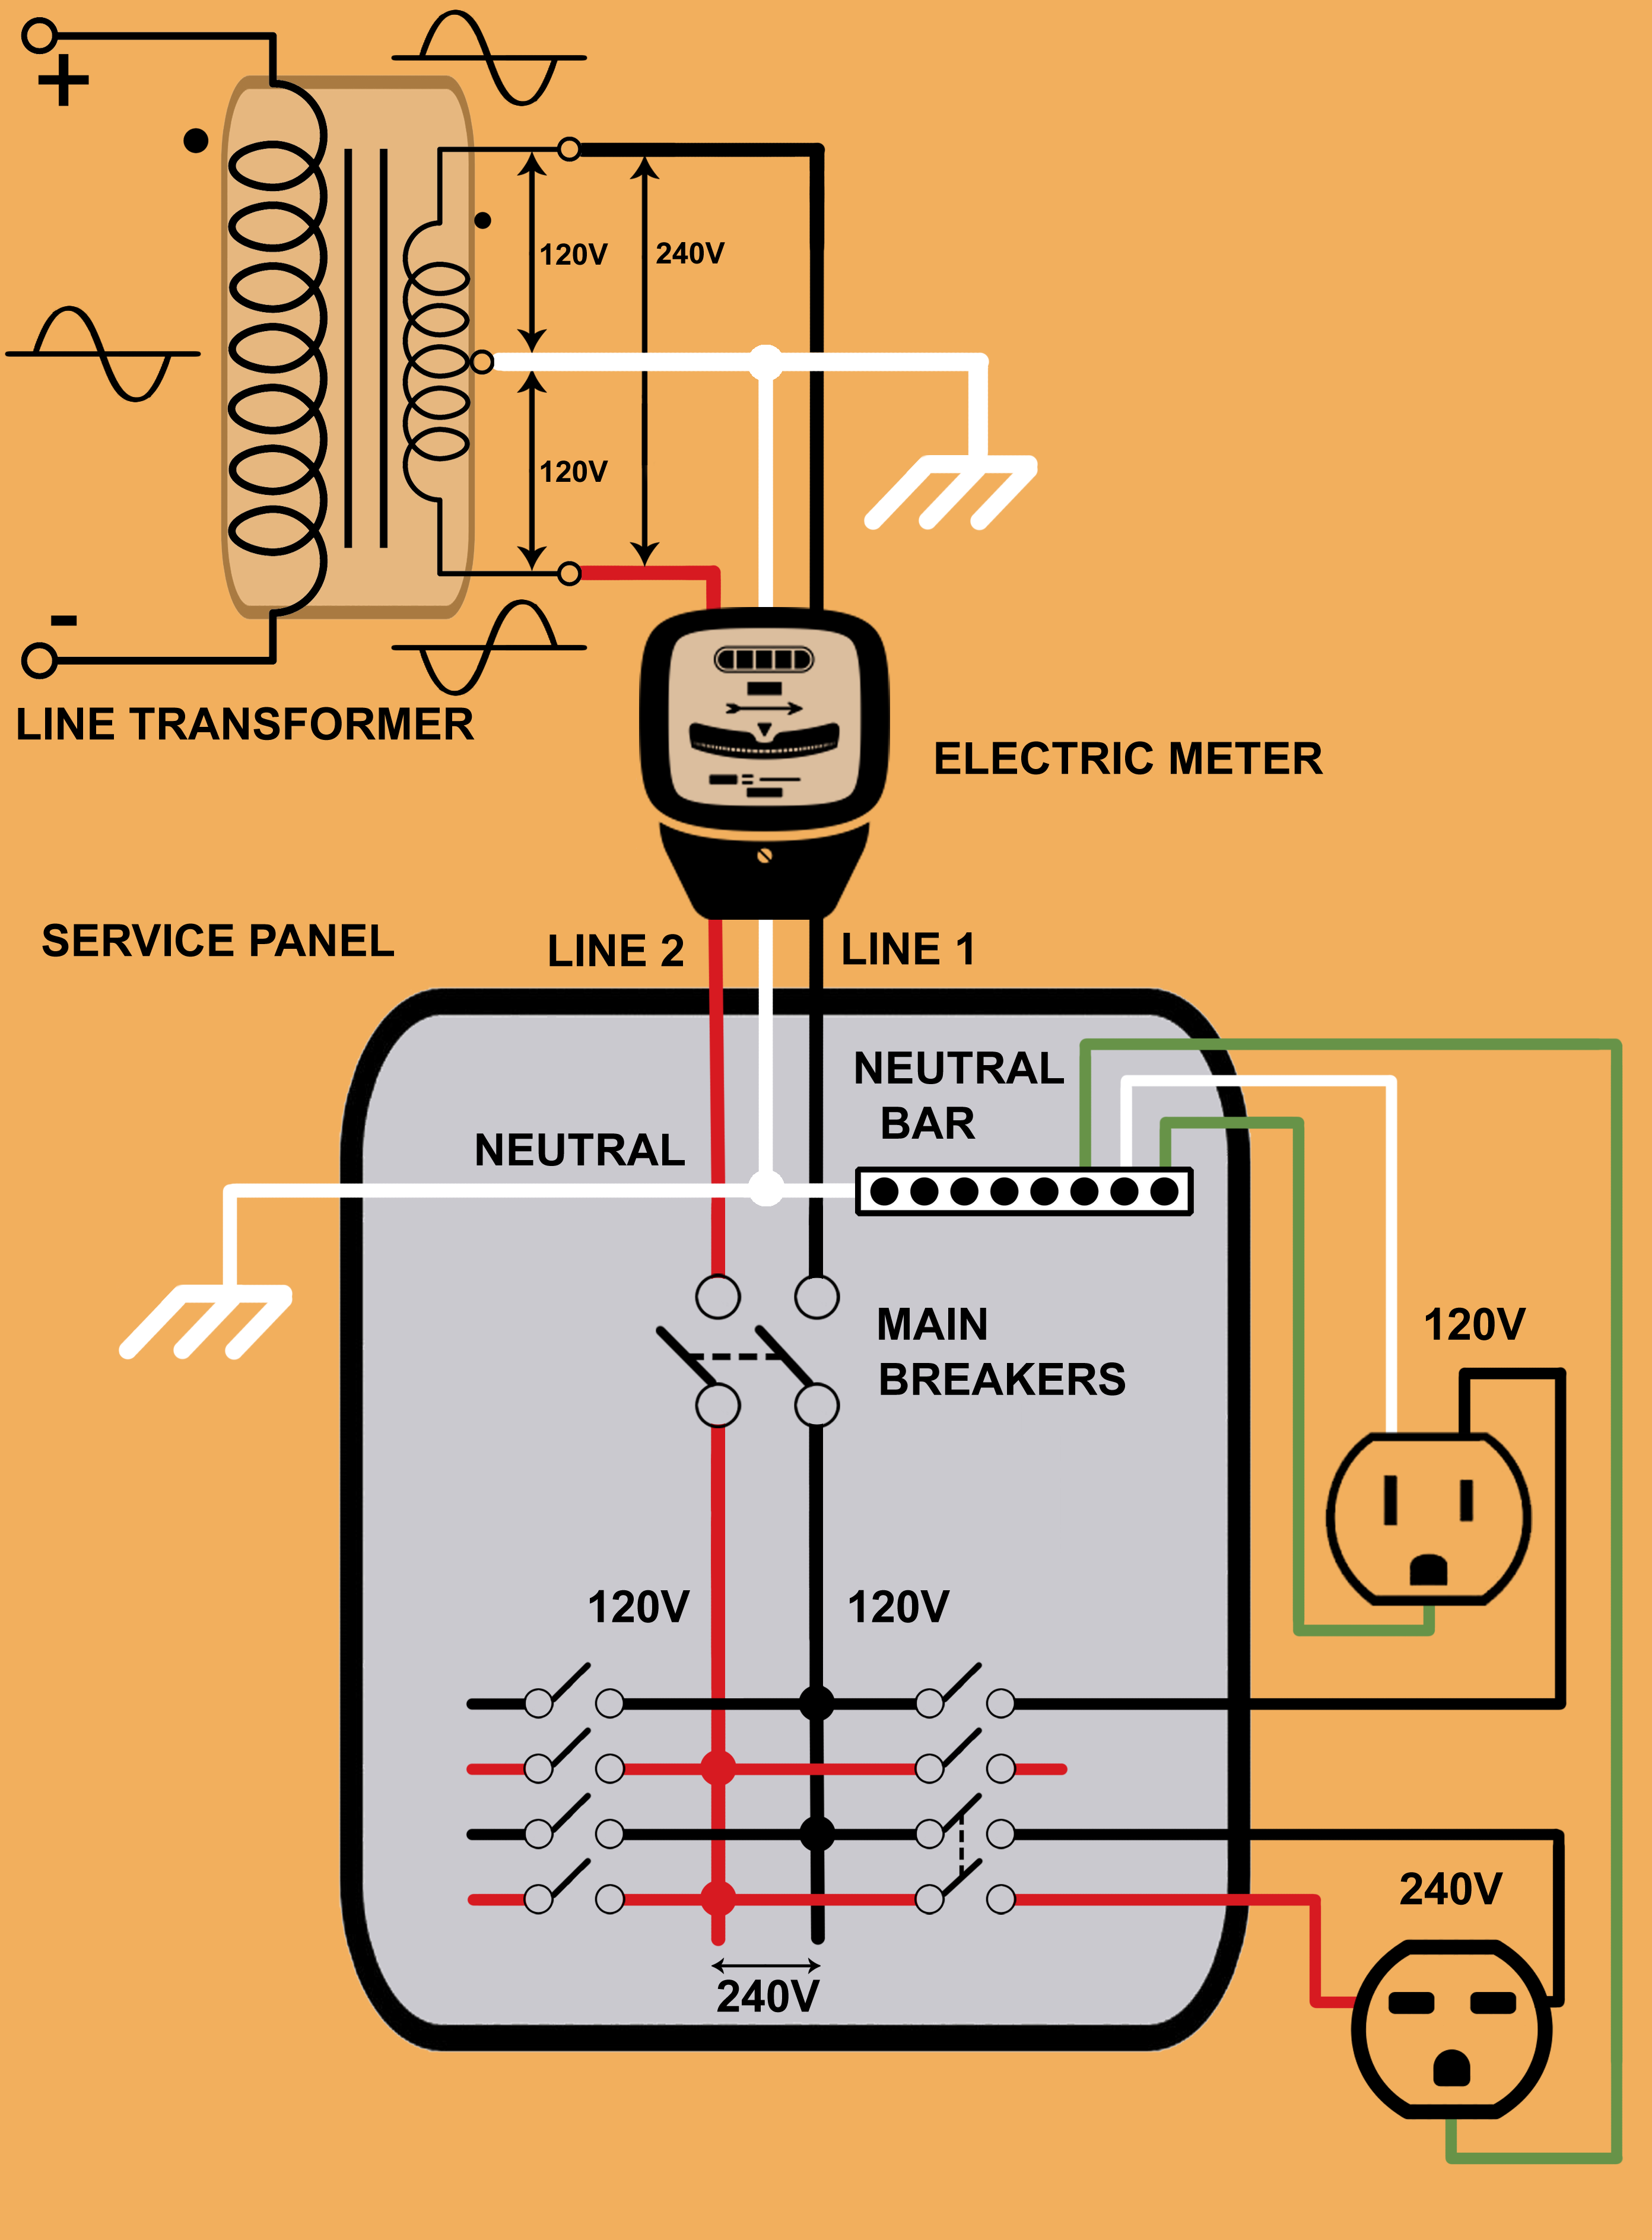 Basics of Your Home's Electrical System